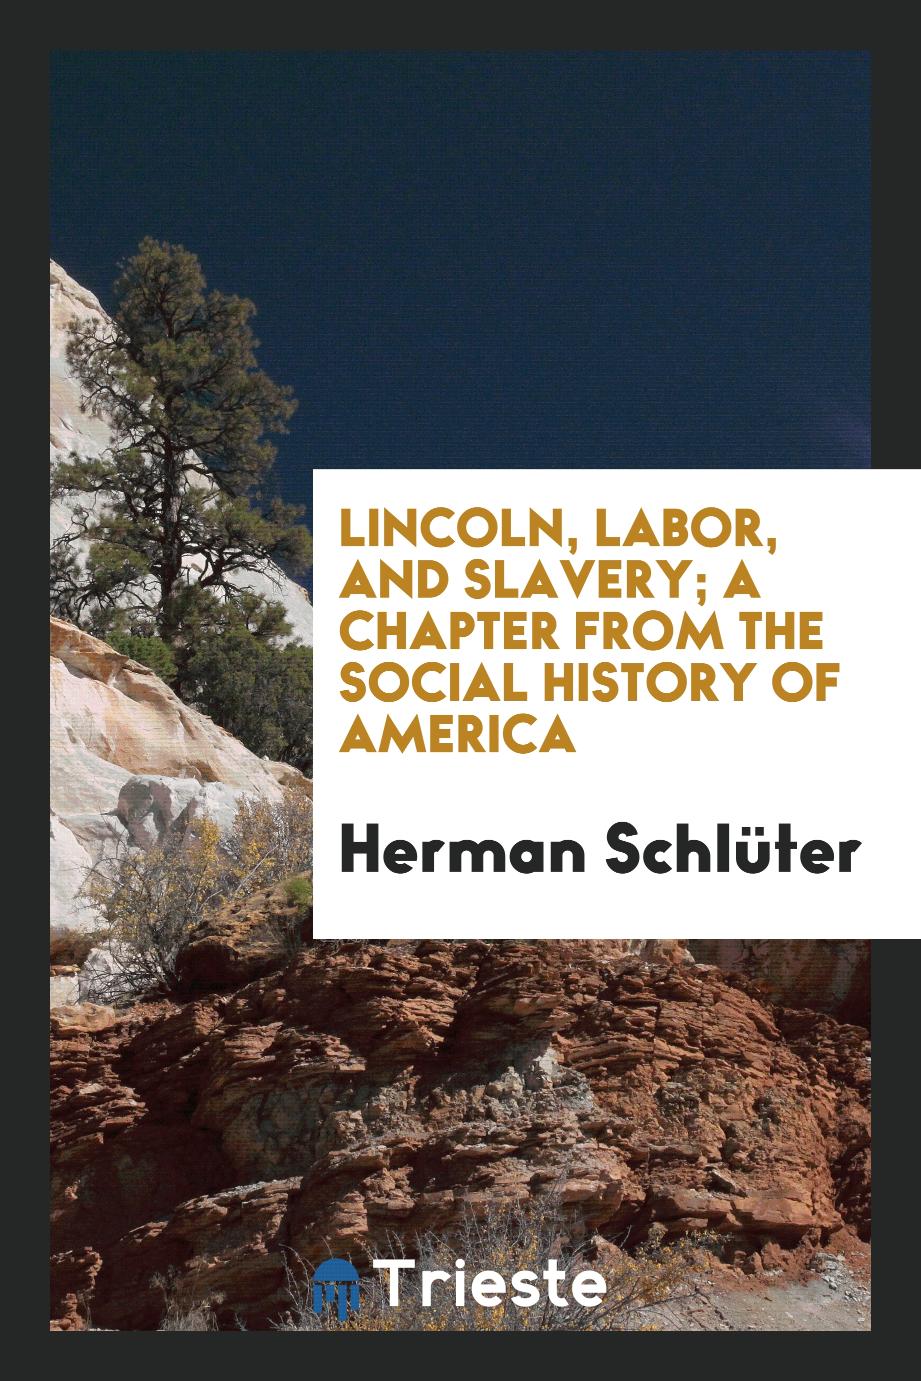 Lincoln, labor, and slavery; a chapter from the social history of America